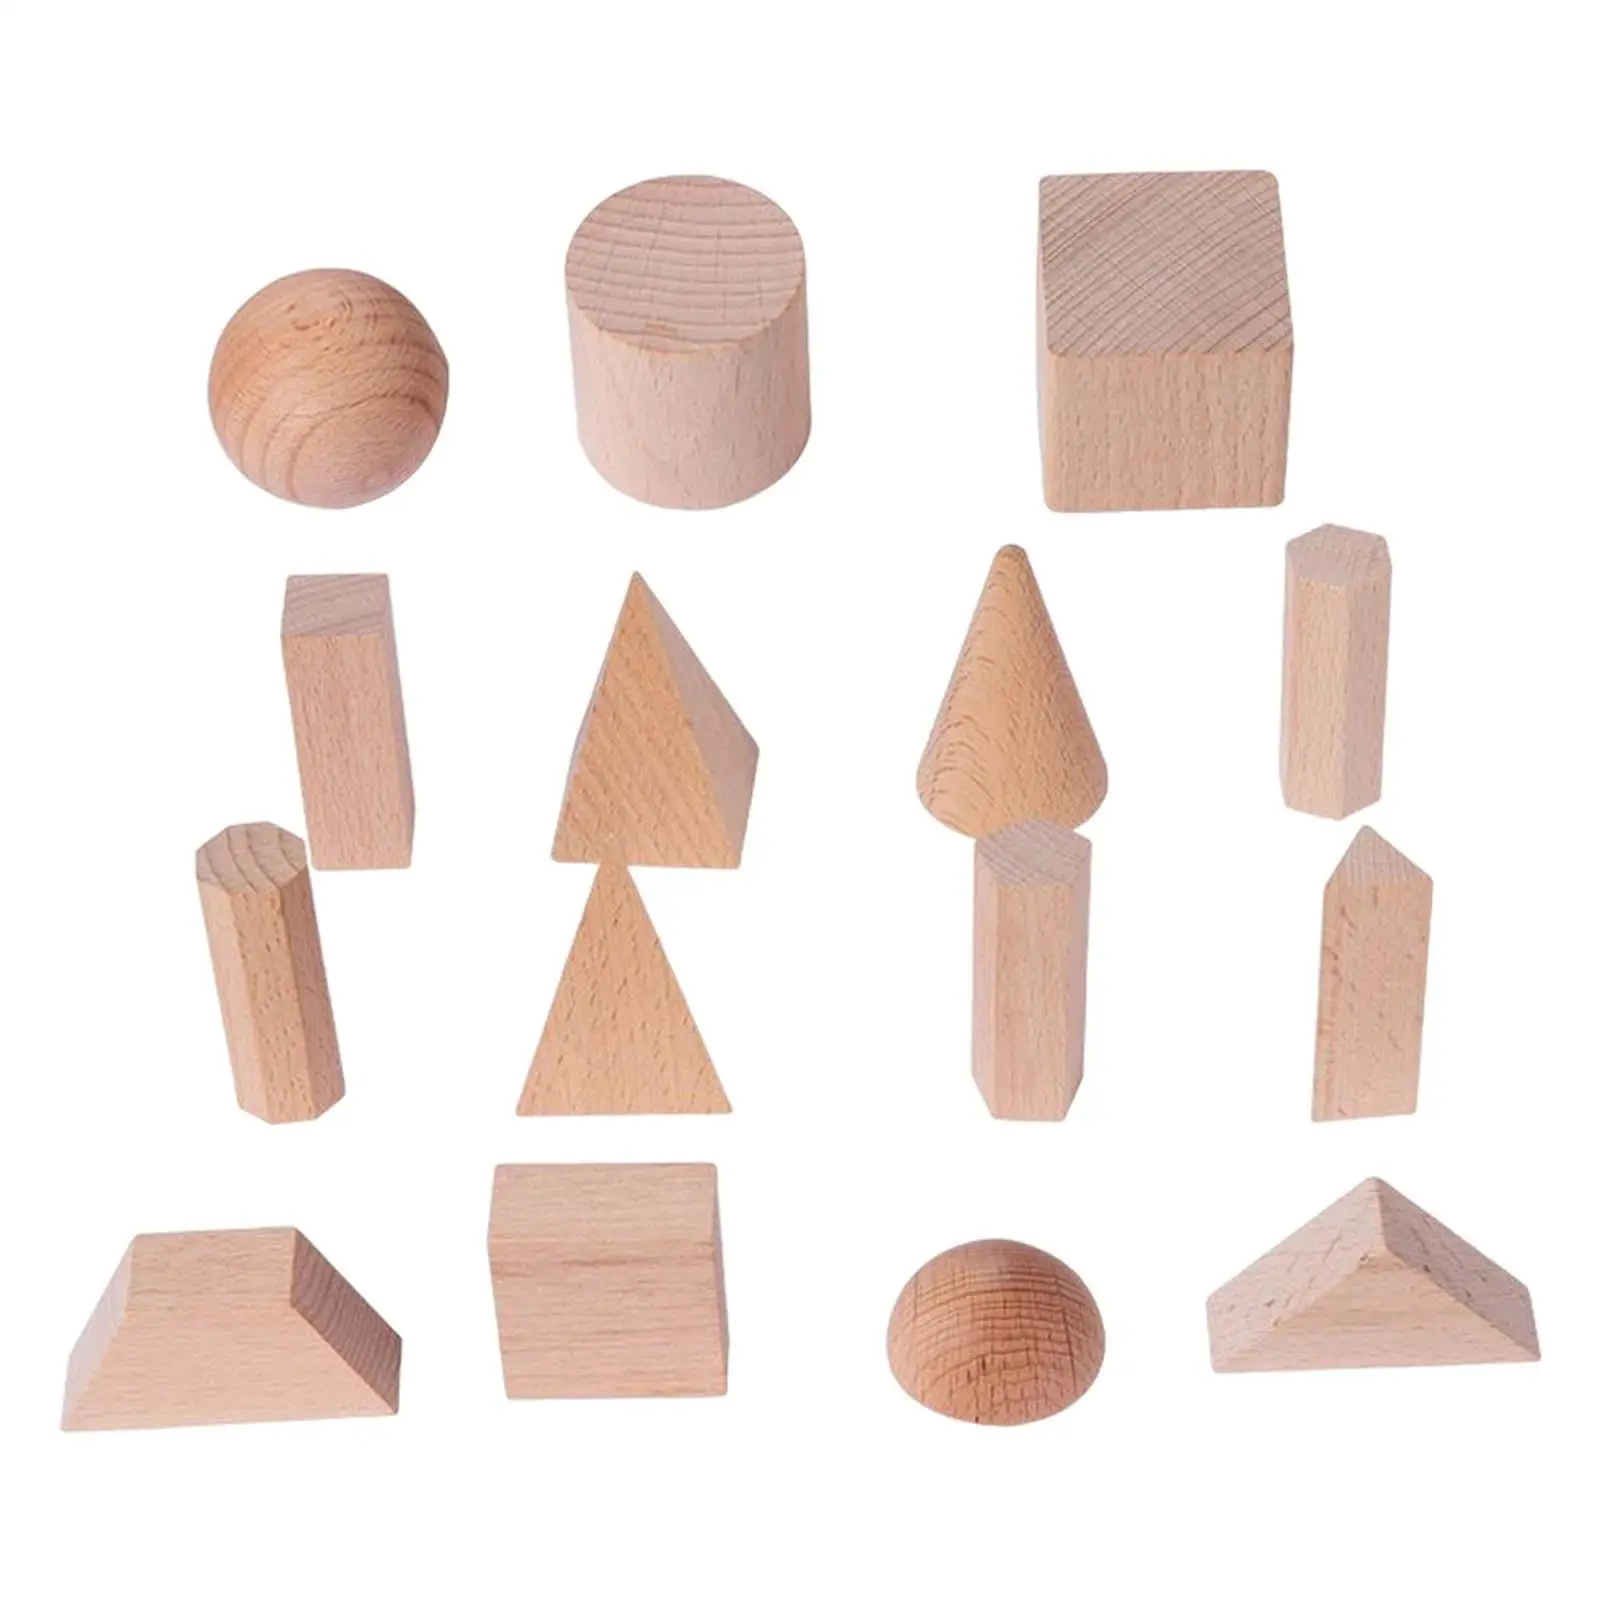 15x Wood Geometric Solids Learning Education Math Toys Shape Sorter Stacking Toy Montessori Toys for Kids Toddler Ages 2+